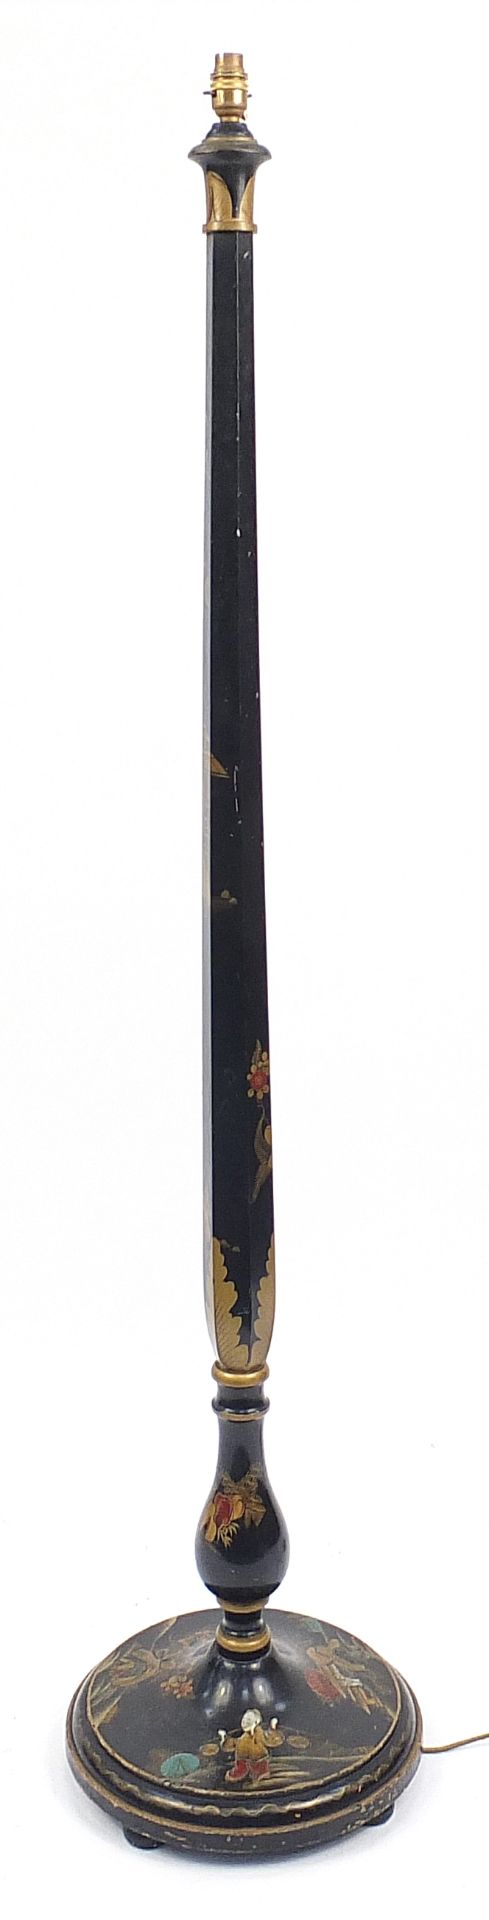 Chinese black lacquered chinoiserie standard lamp, 155cm high - Image 5 of 6